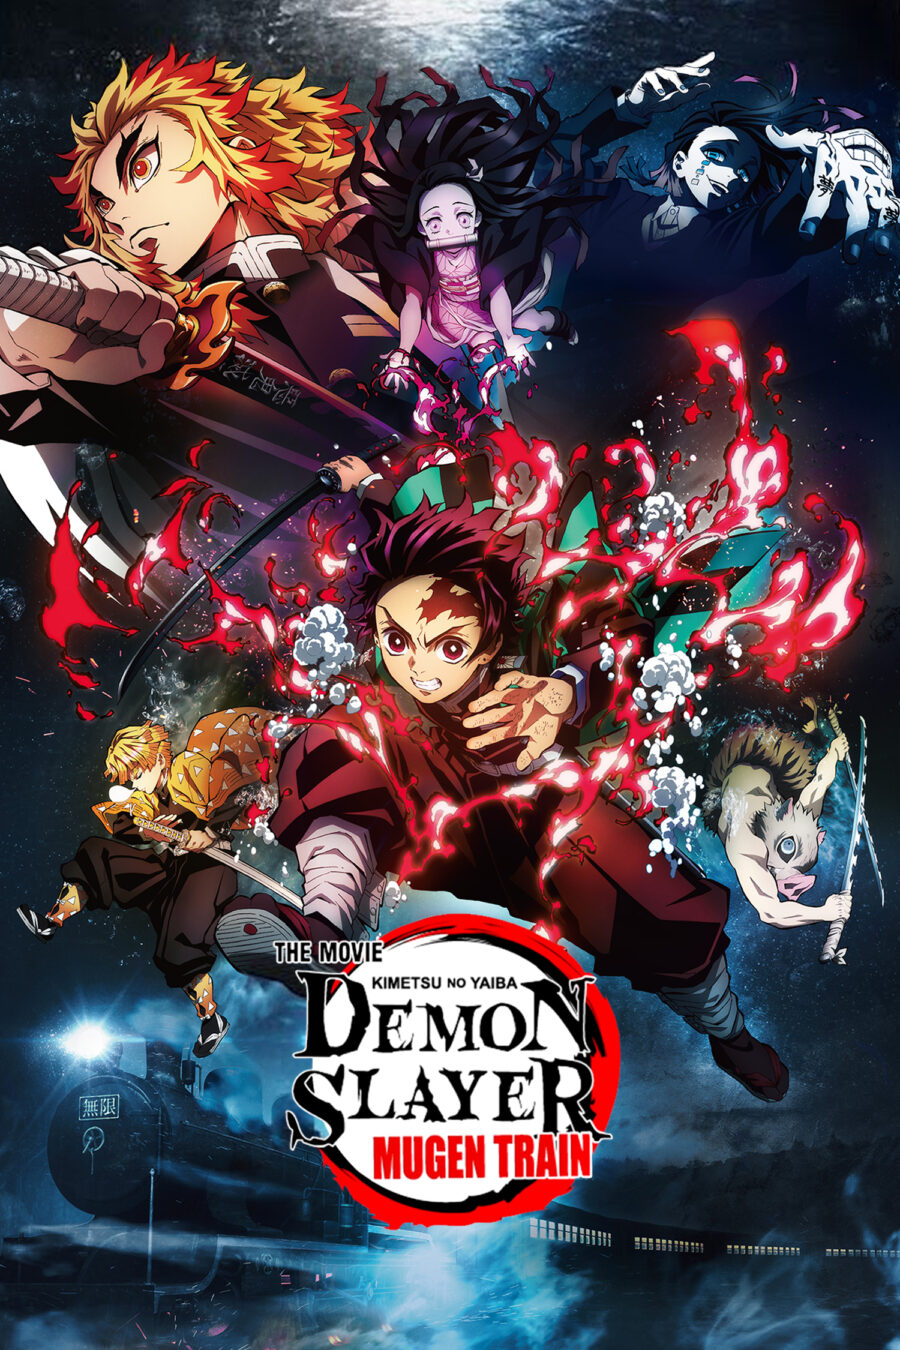 Will Demon Slayer Be Hollywood's Next Live-Action Anime Pursuit?